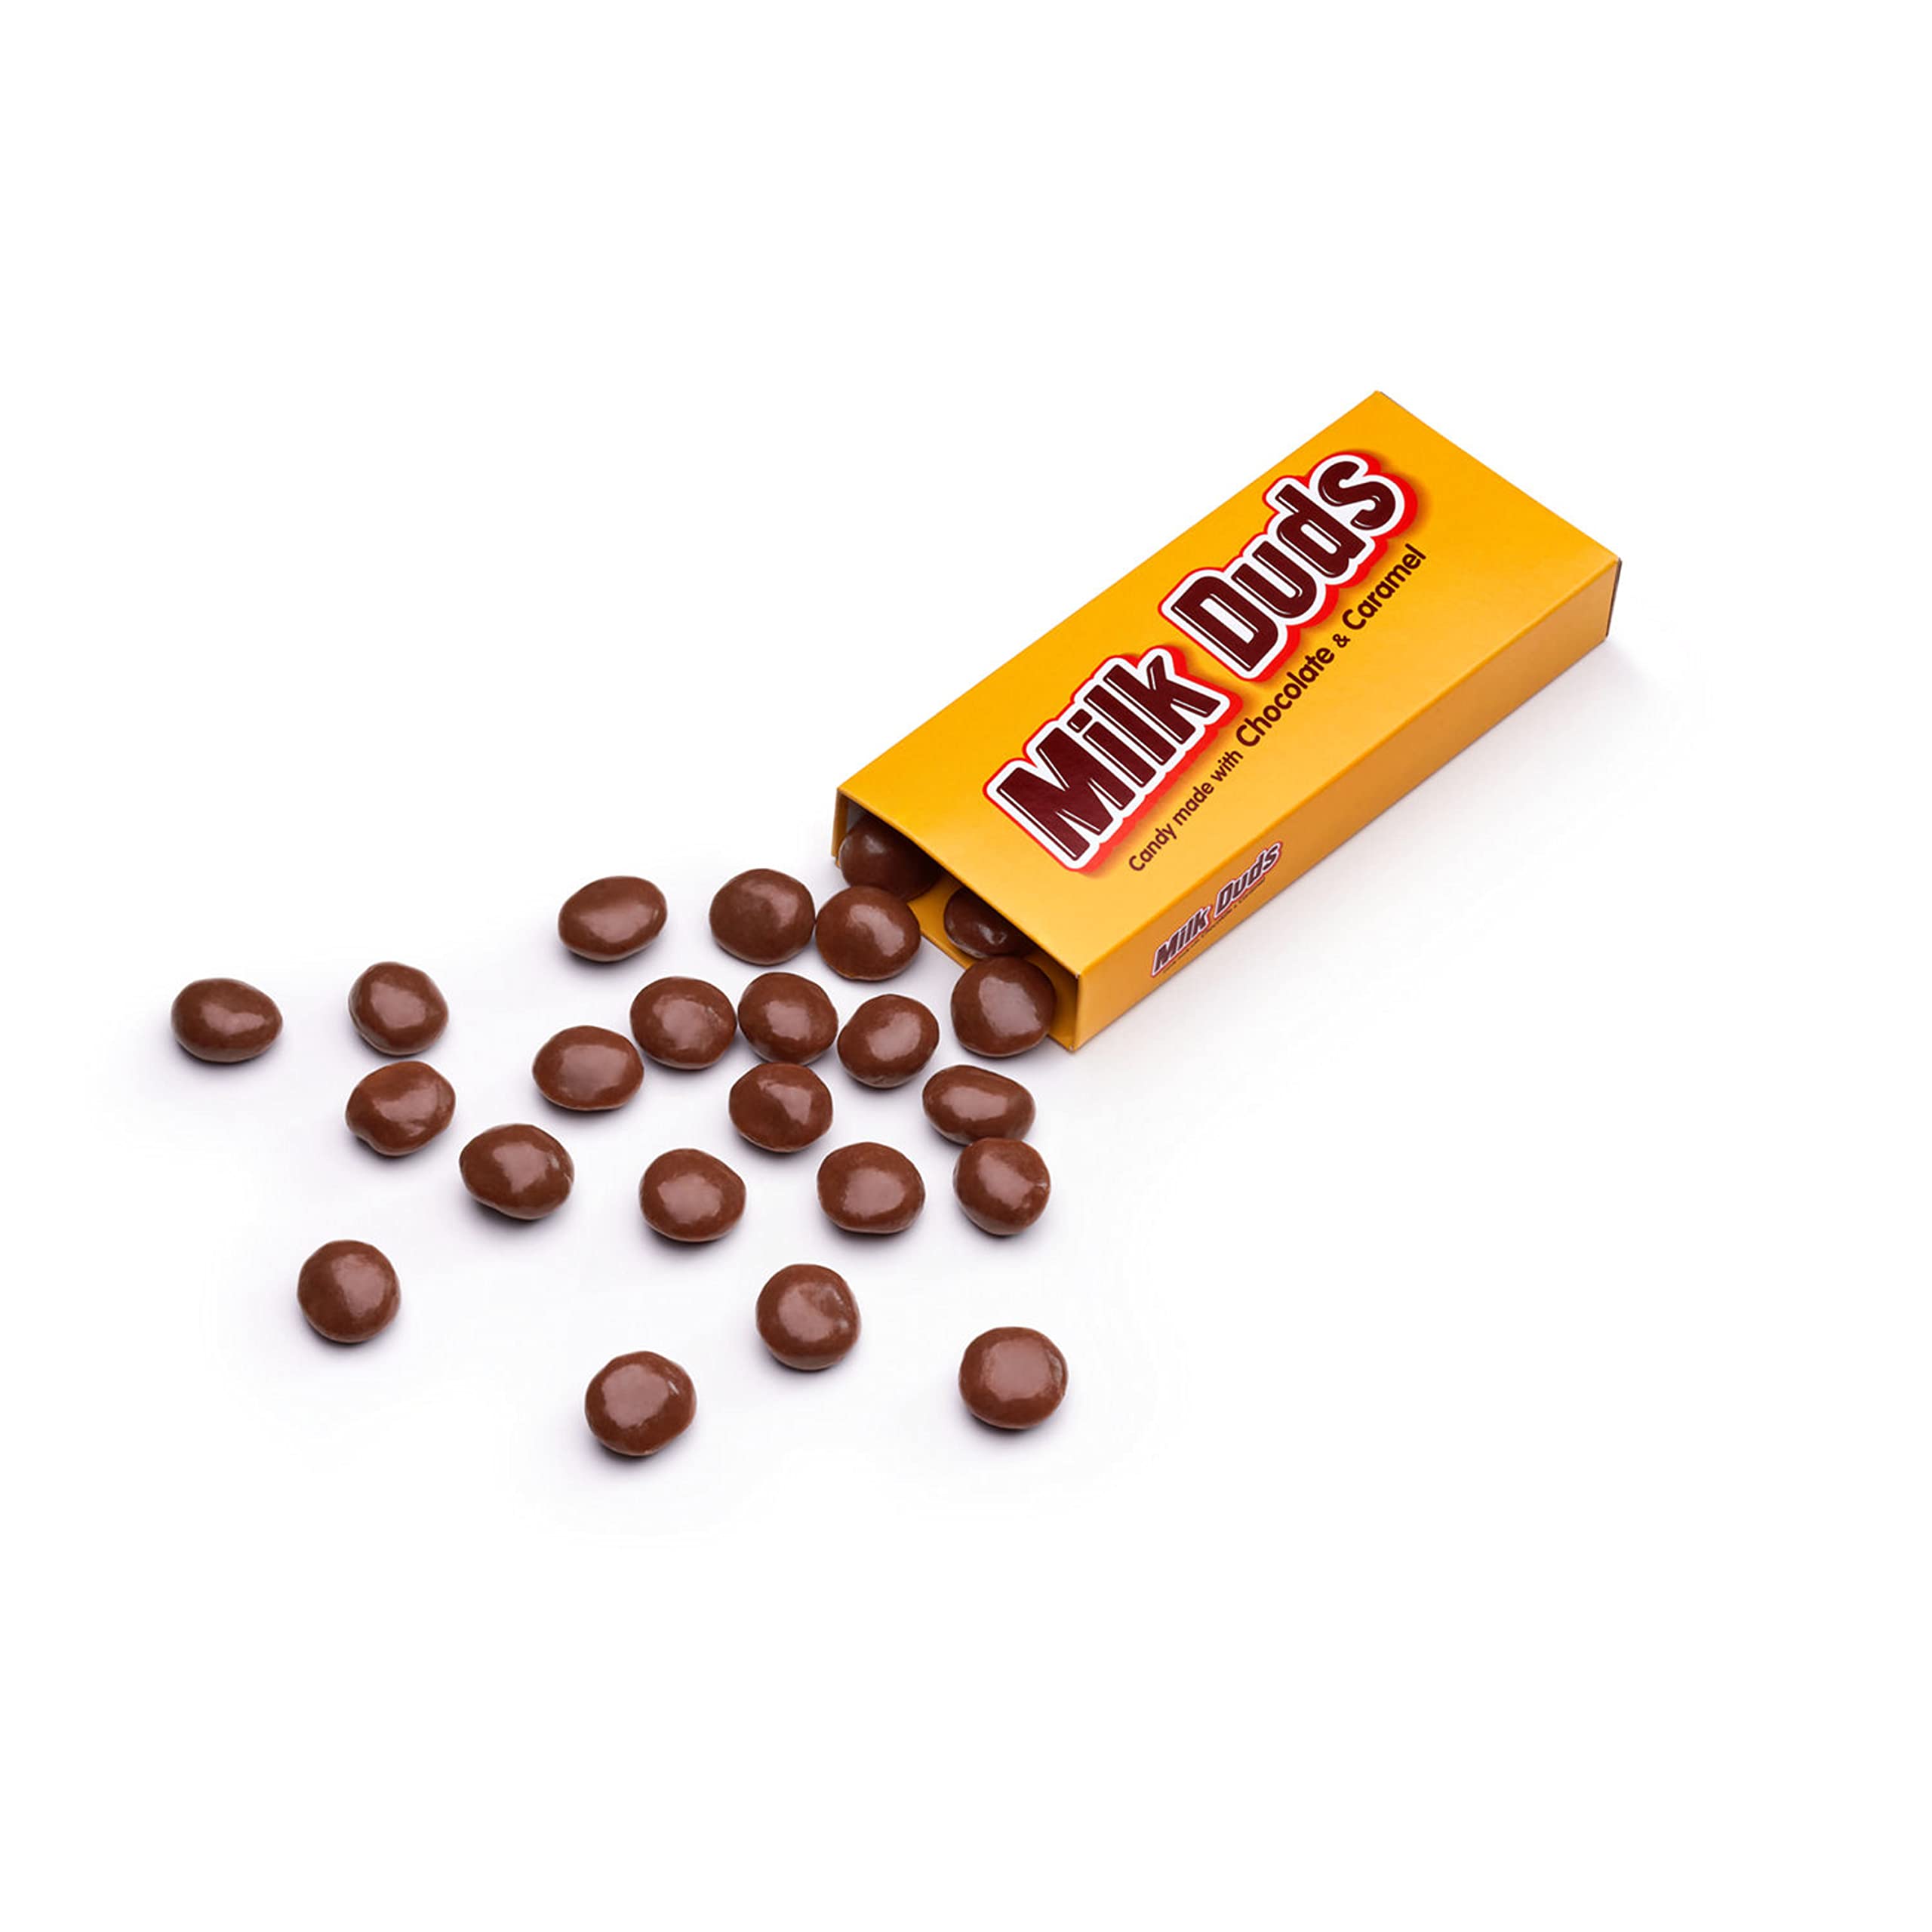 Hershey's Whoppers Original Light and Crunchy Malted Milk Candy